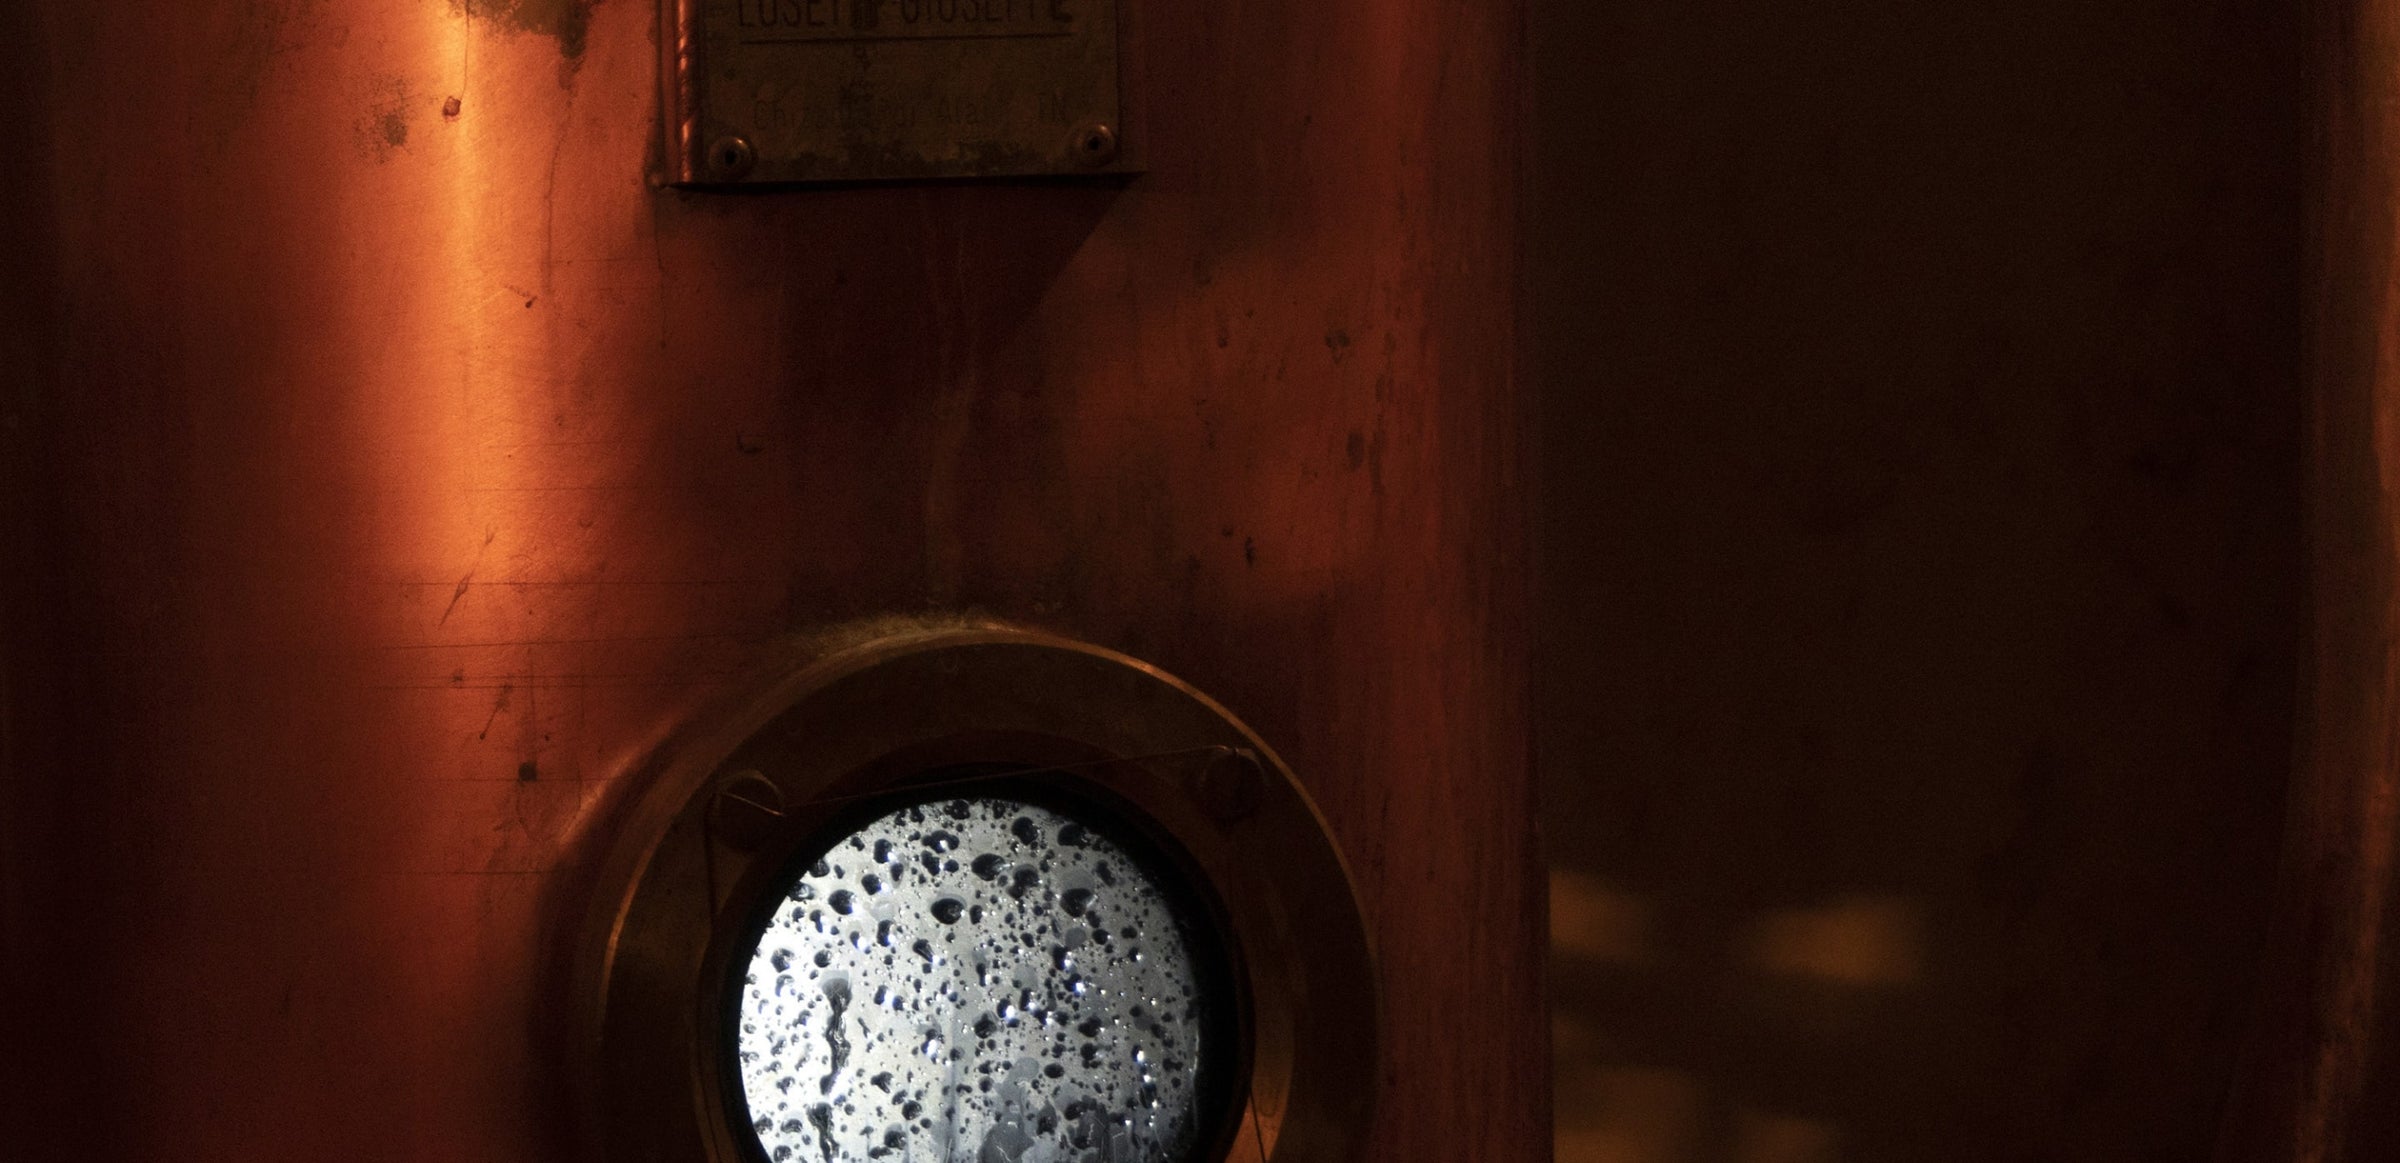 Close up of some machinary used during the whisky creation process with a port hole window covered in steam